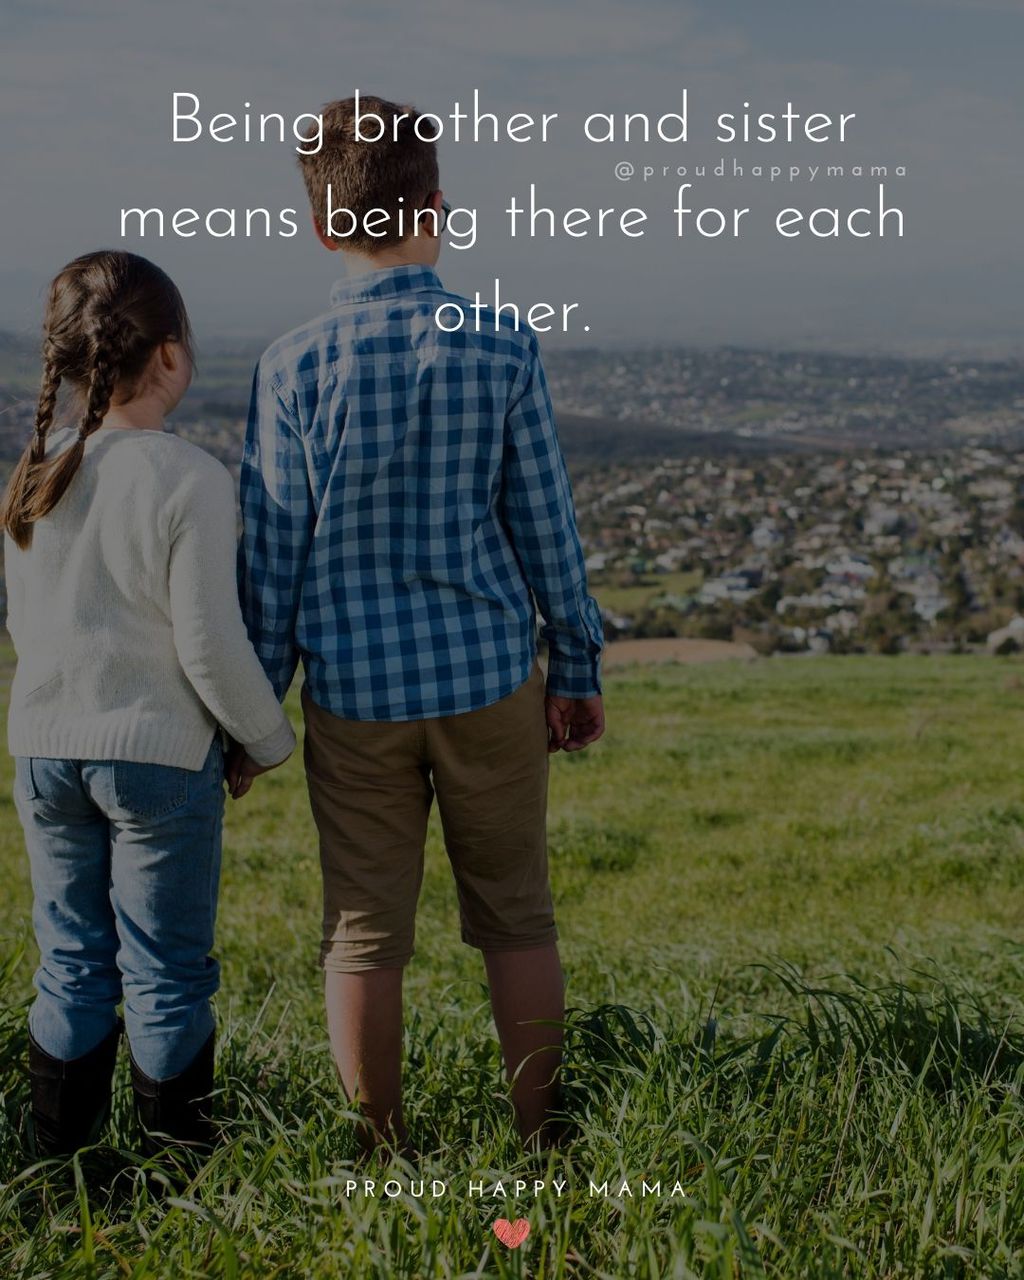 Sister Quotes - Being brother and sister means being there for each other